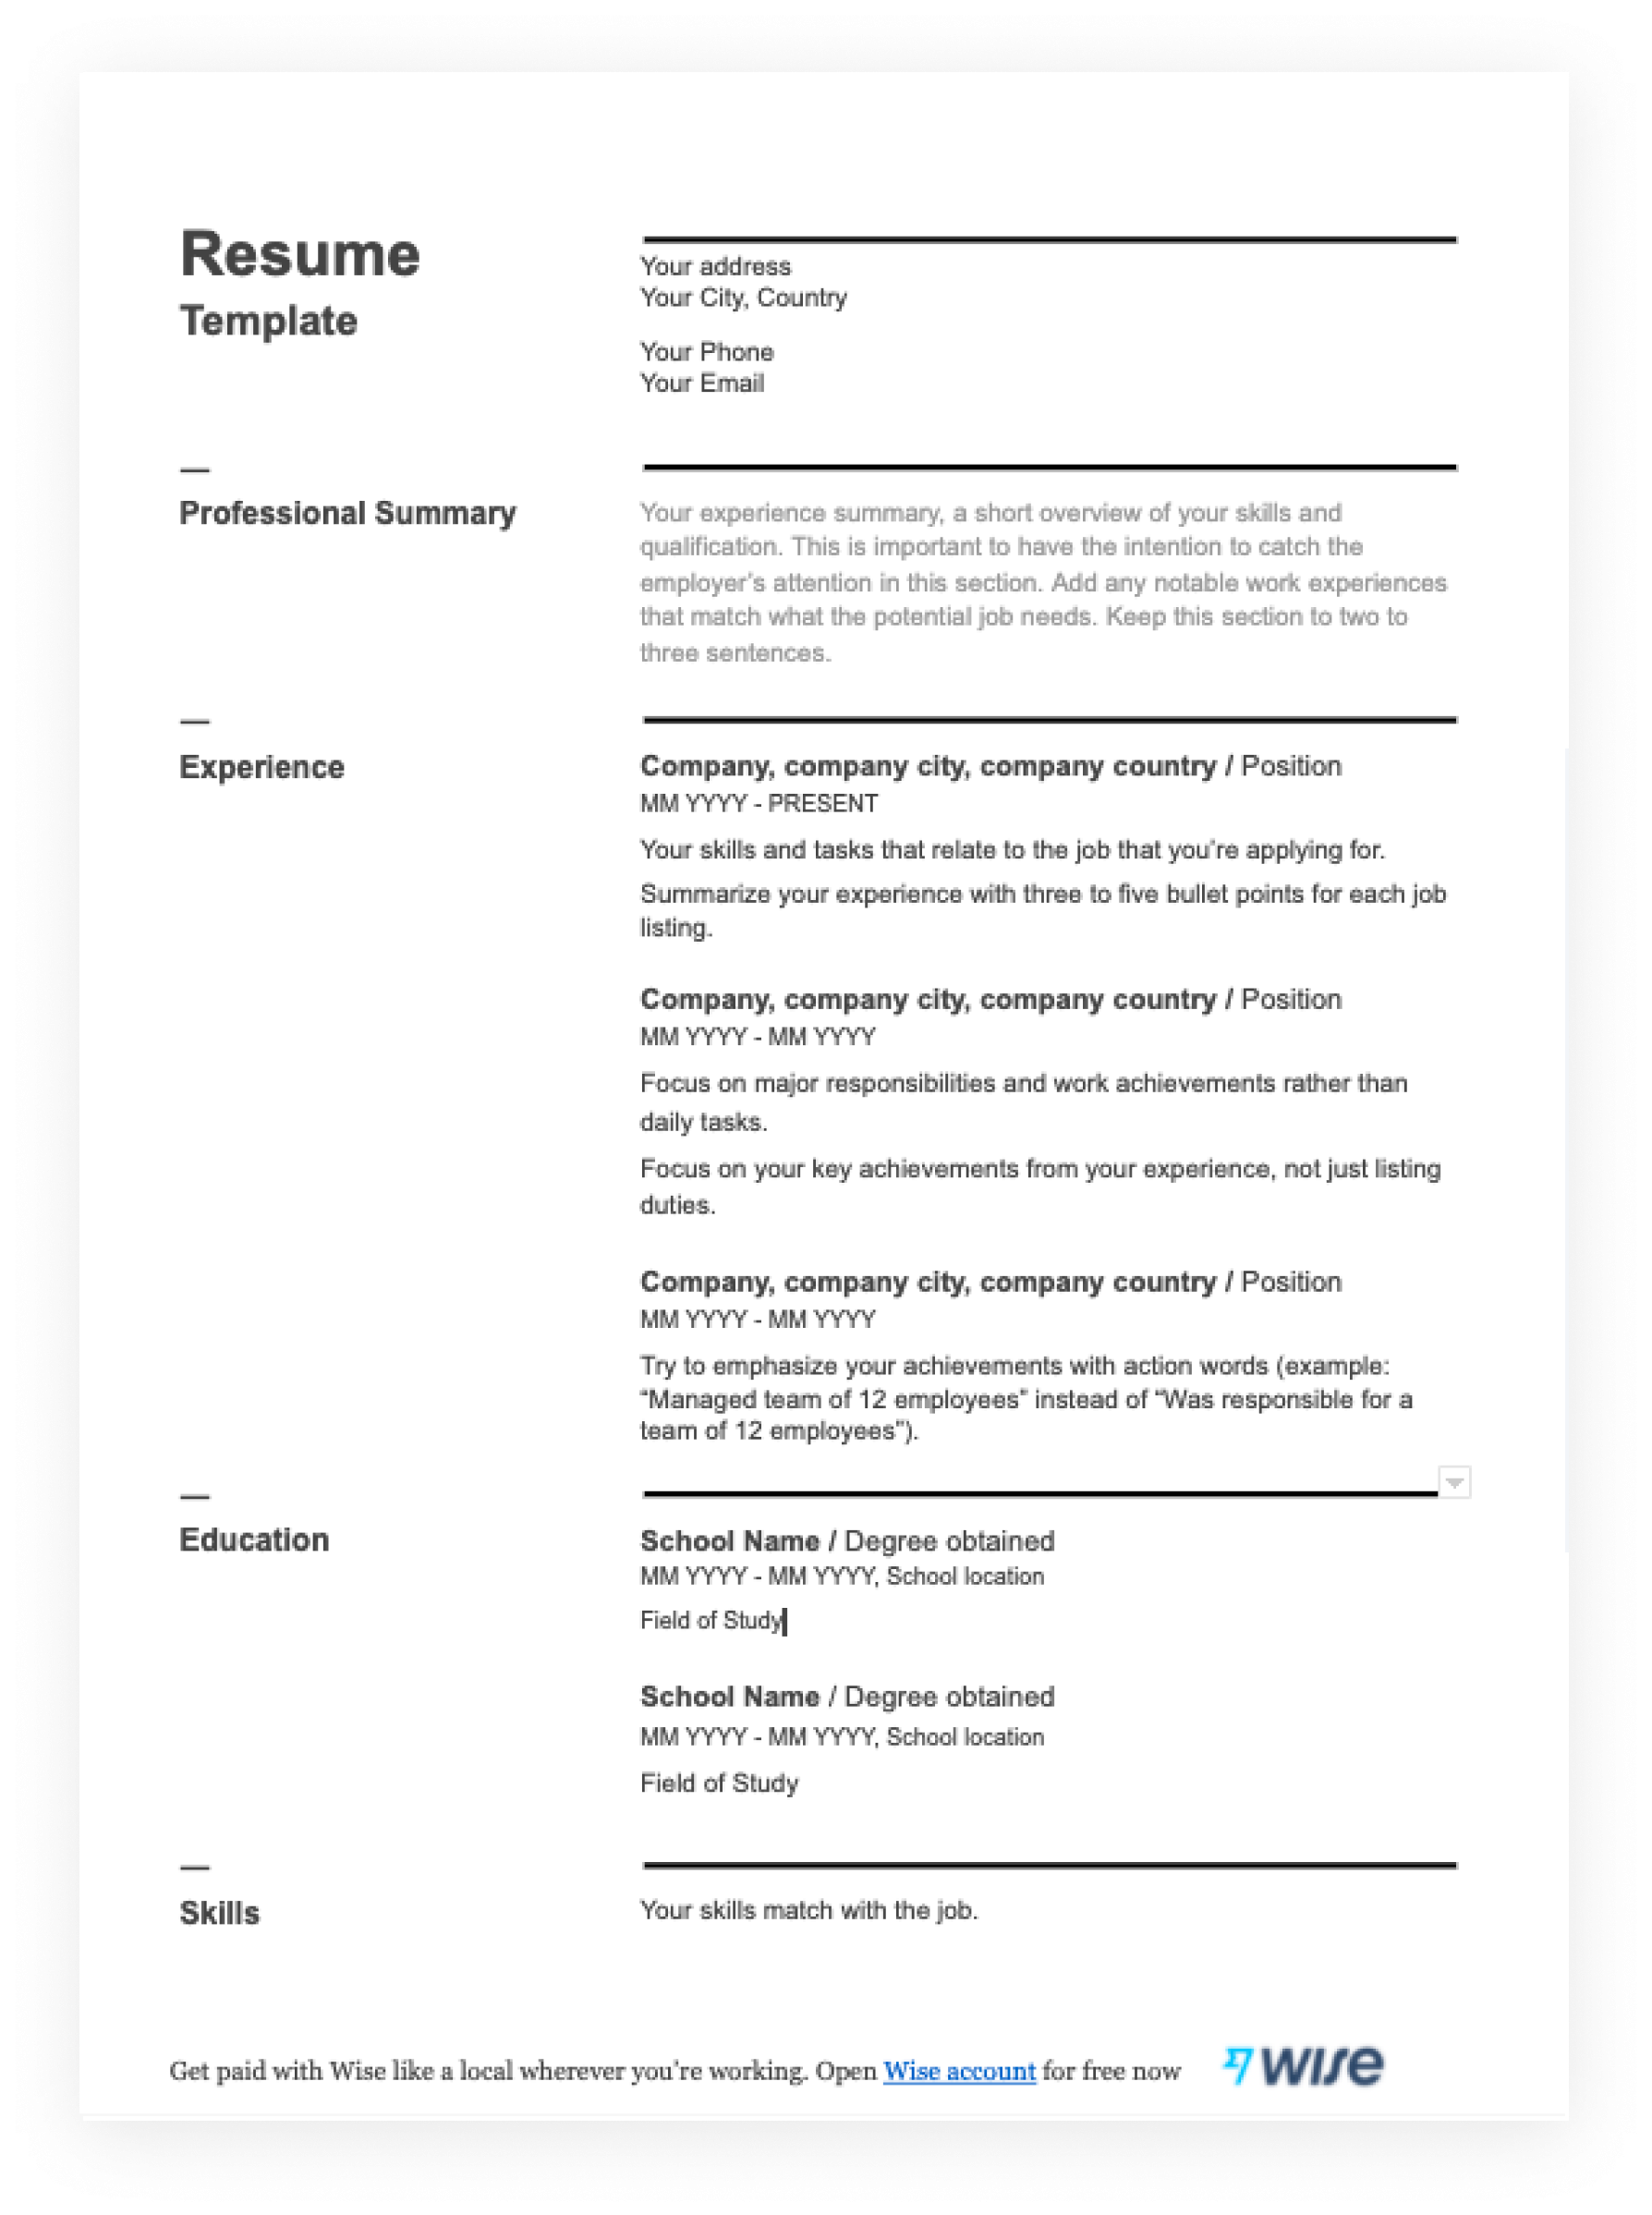 Download a free resume template